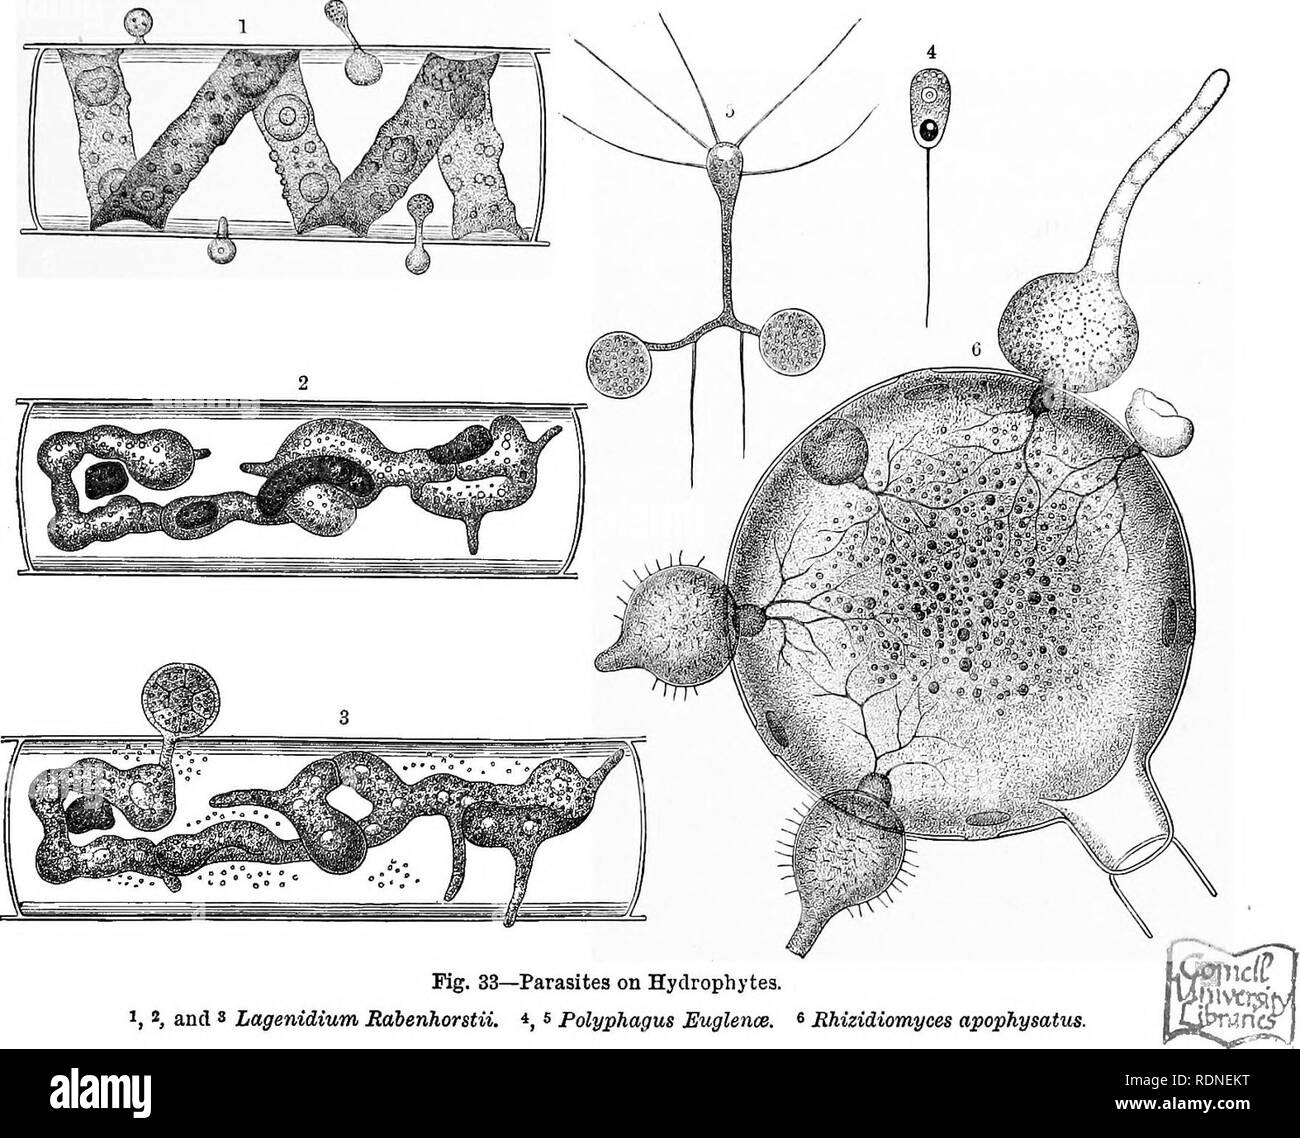 . The natural history of plants, their forms, growth, reproduction, and distribution;. Botany. BACTERIA. FUNGI. 169 &quot;honey-combed ringworm&quot;, and named Favus by doctors; dandruff (Pityriasis versicolor) is produced by Microsporon furfur, and Herpes tonsurans by Trico- phyton tonsurans. The latter has a remarkable effect on the hair, causing it to fall out and leave the part of the skin affected bald. Water-plants are attacked by parasitic fungi comparatively rarely, which is the more noteworthy because such large numbers of non-parasitic epiphytes settle upon the filaments of green al Stock Photo